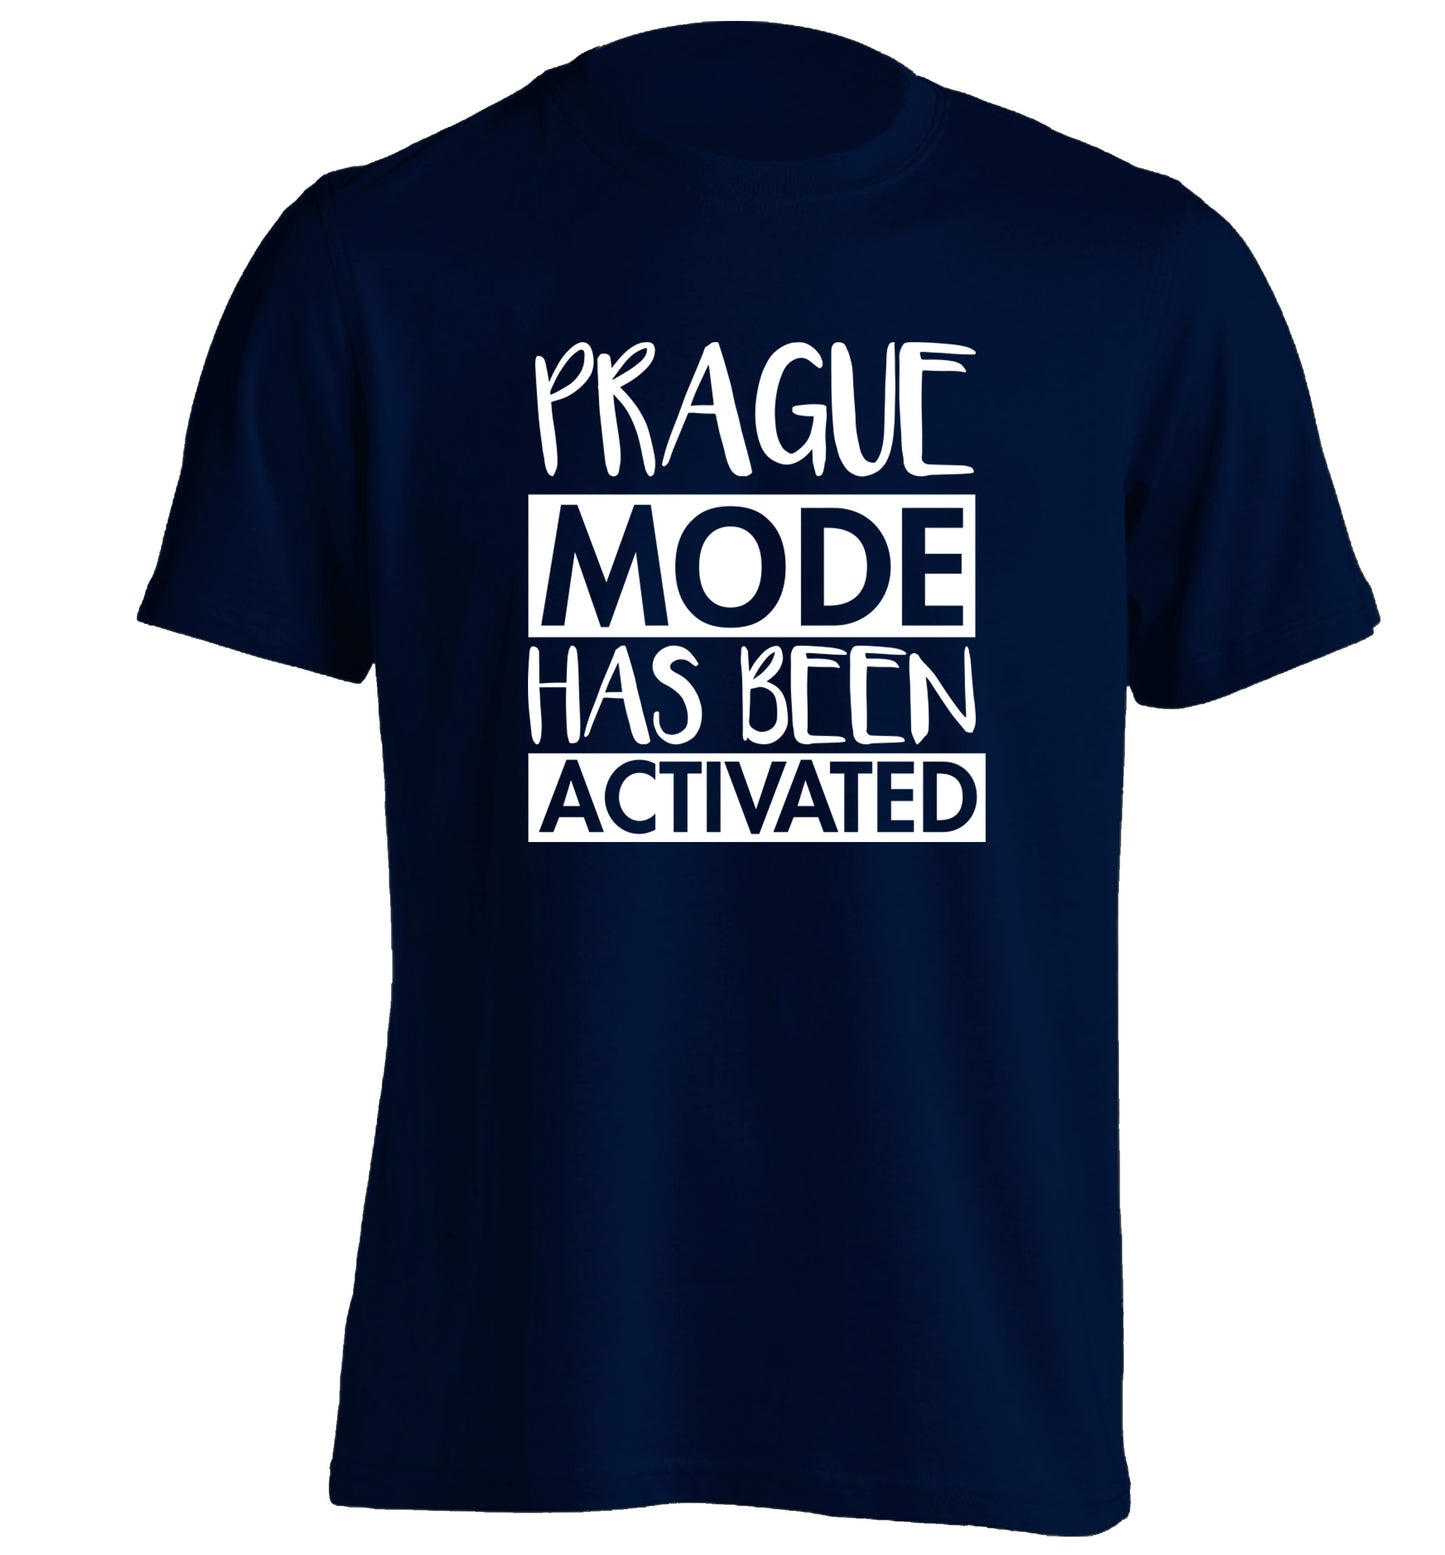 Prague mode has been activated adults unisex navy Tshirt 2XL